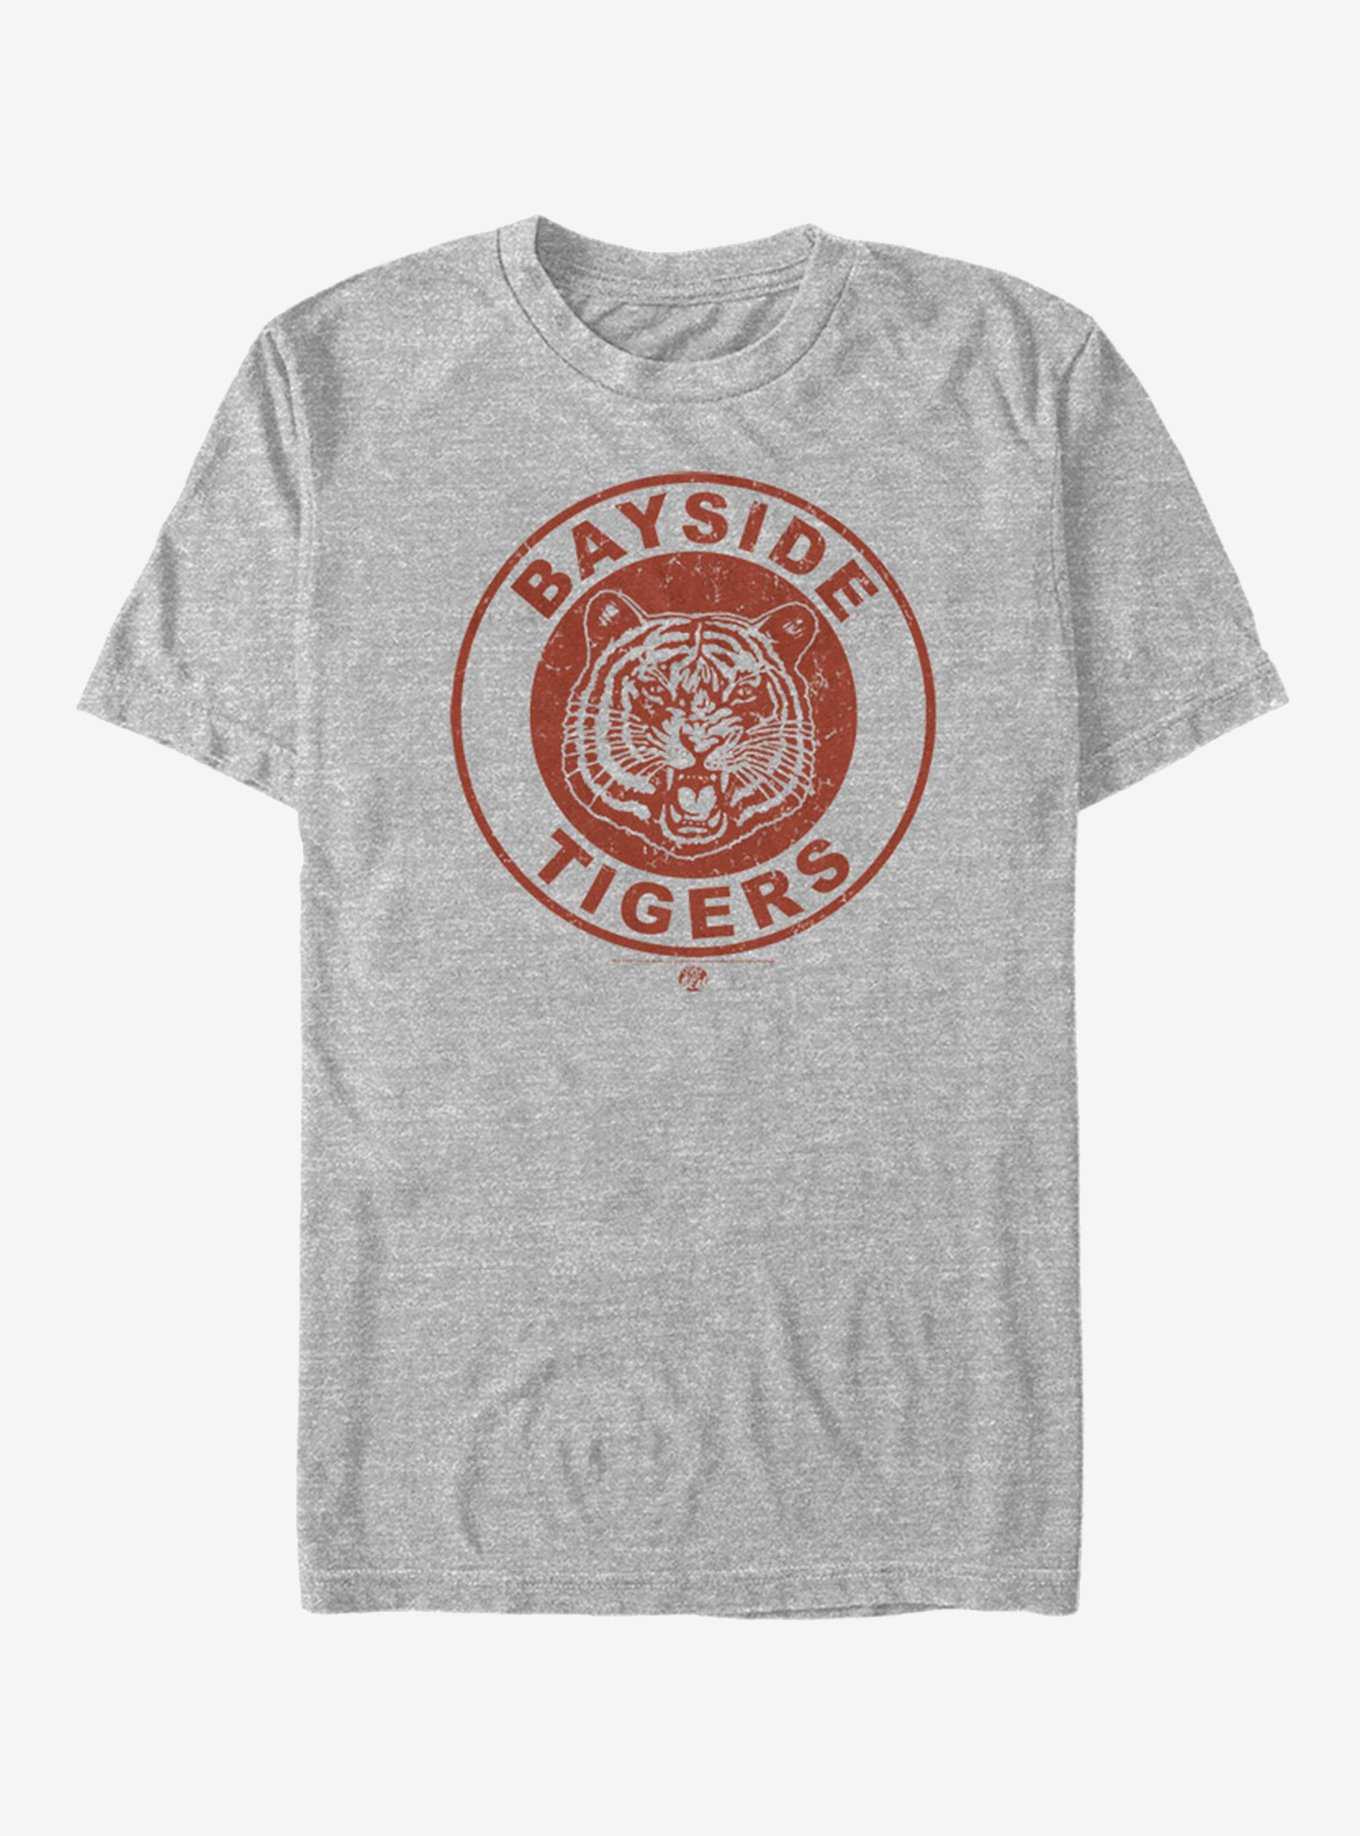 Saved By the Bell Bayside Tigers T-Shirt, , hi-res